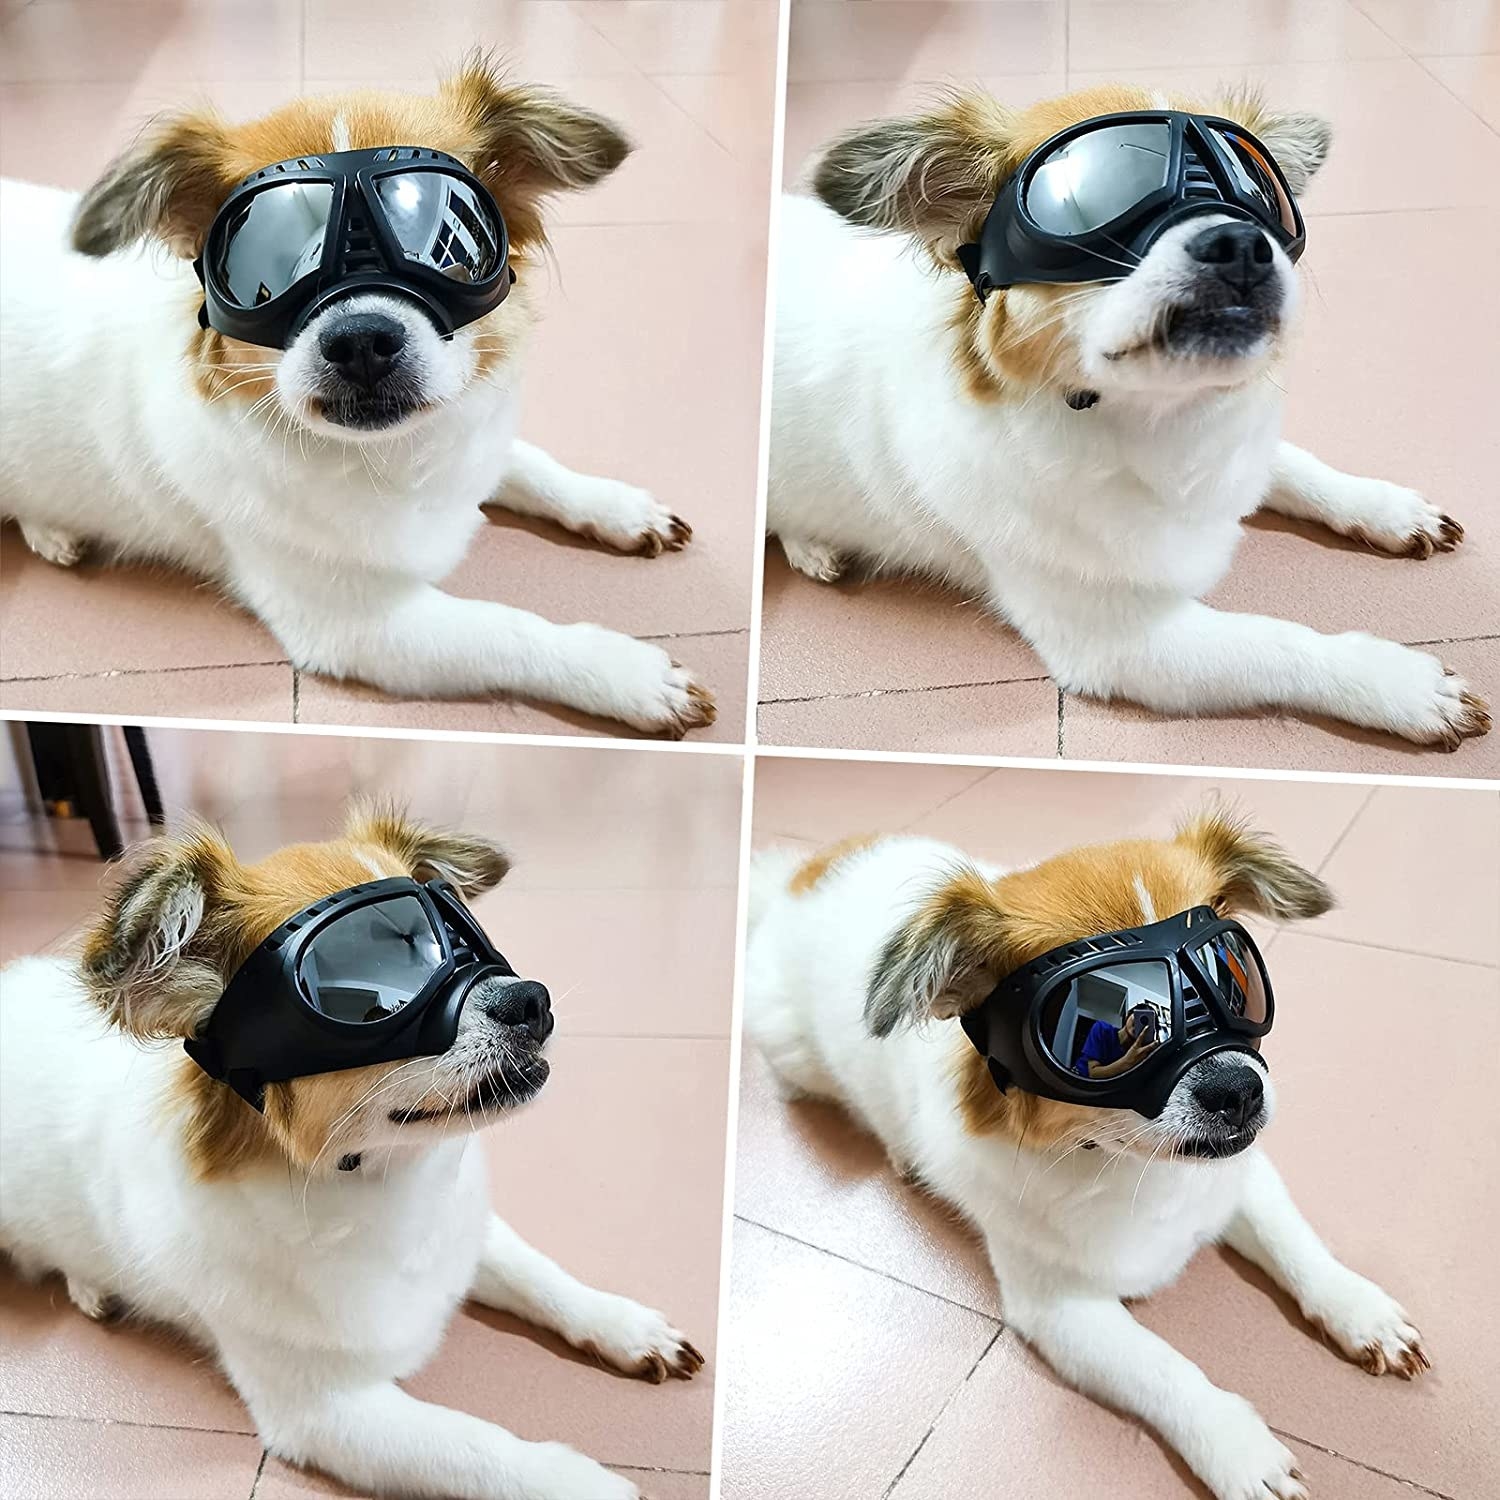 A four-photo collage of a small dog wearing the goggles and laying on a tile floor